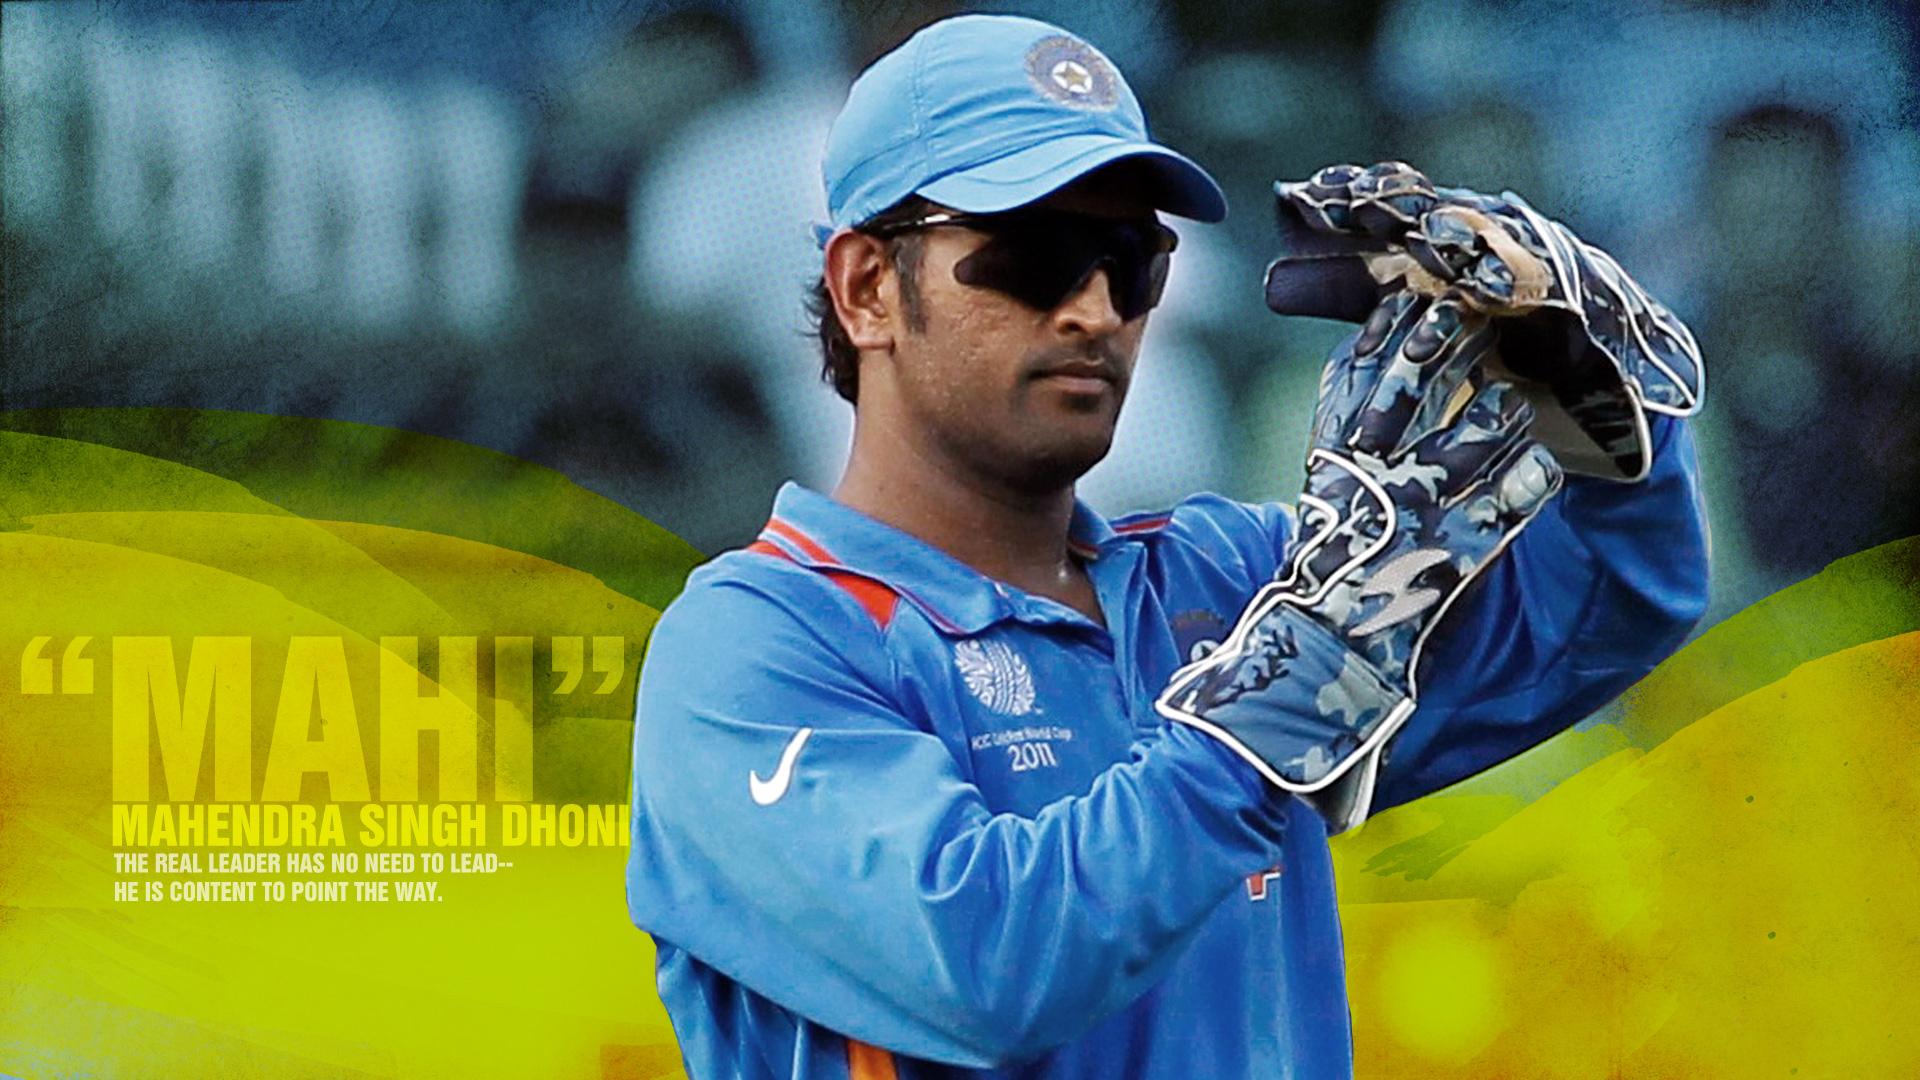 Dhoni Wallpapers High Resolution and Quality Download